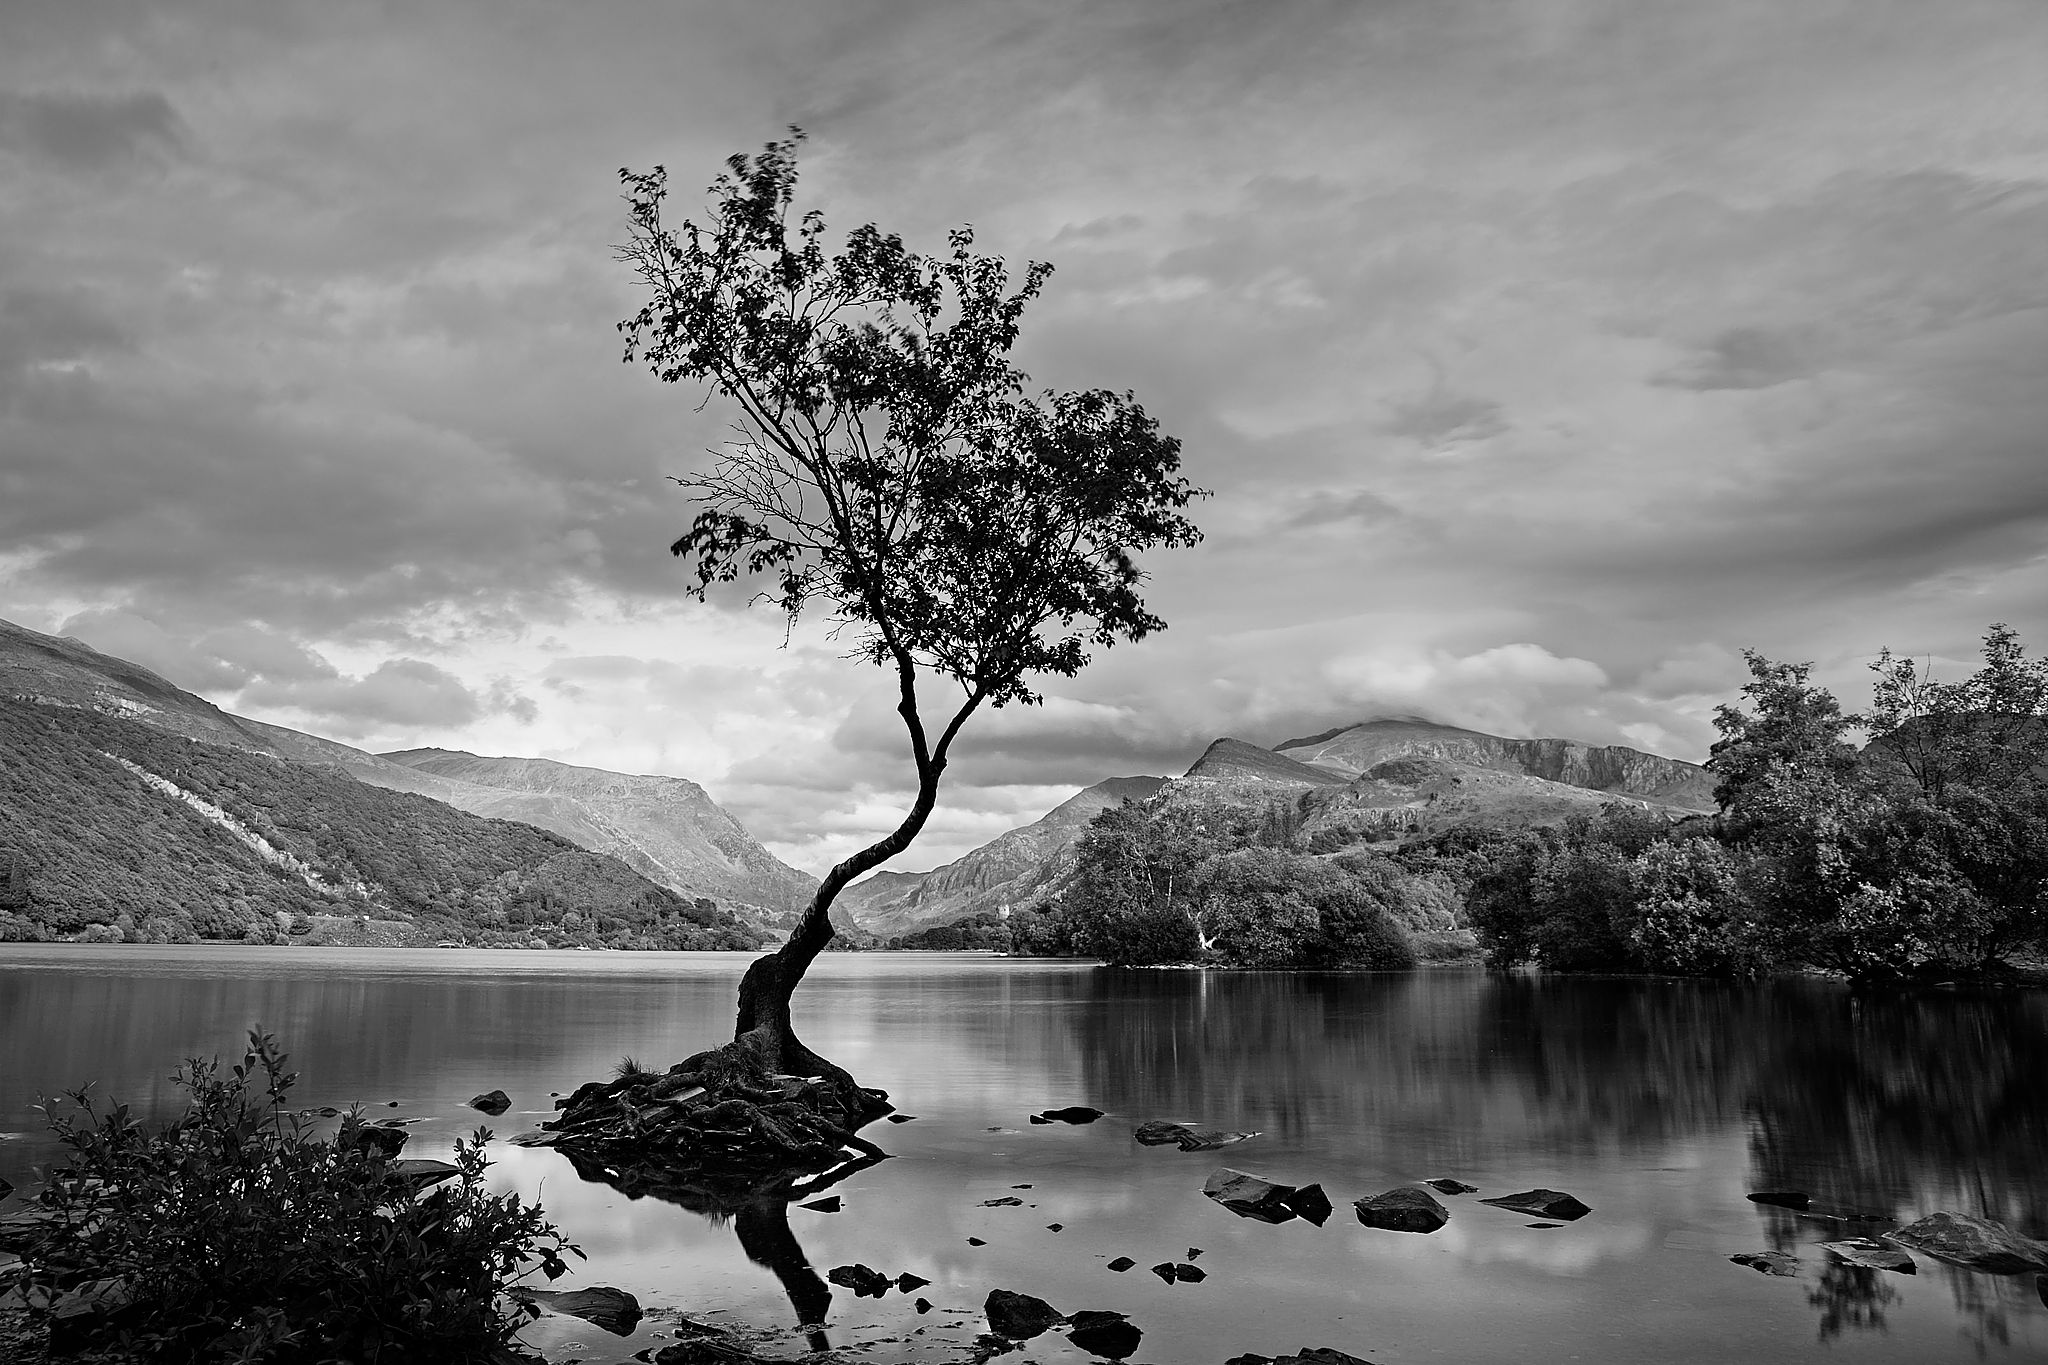 The Lonely Tree, Llanberis, Wales by Sam Davis Photographer. Wales Landscape photography. Llyn Padarn. Black and white. For sale.